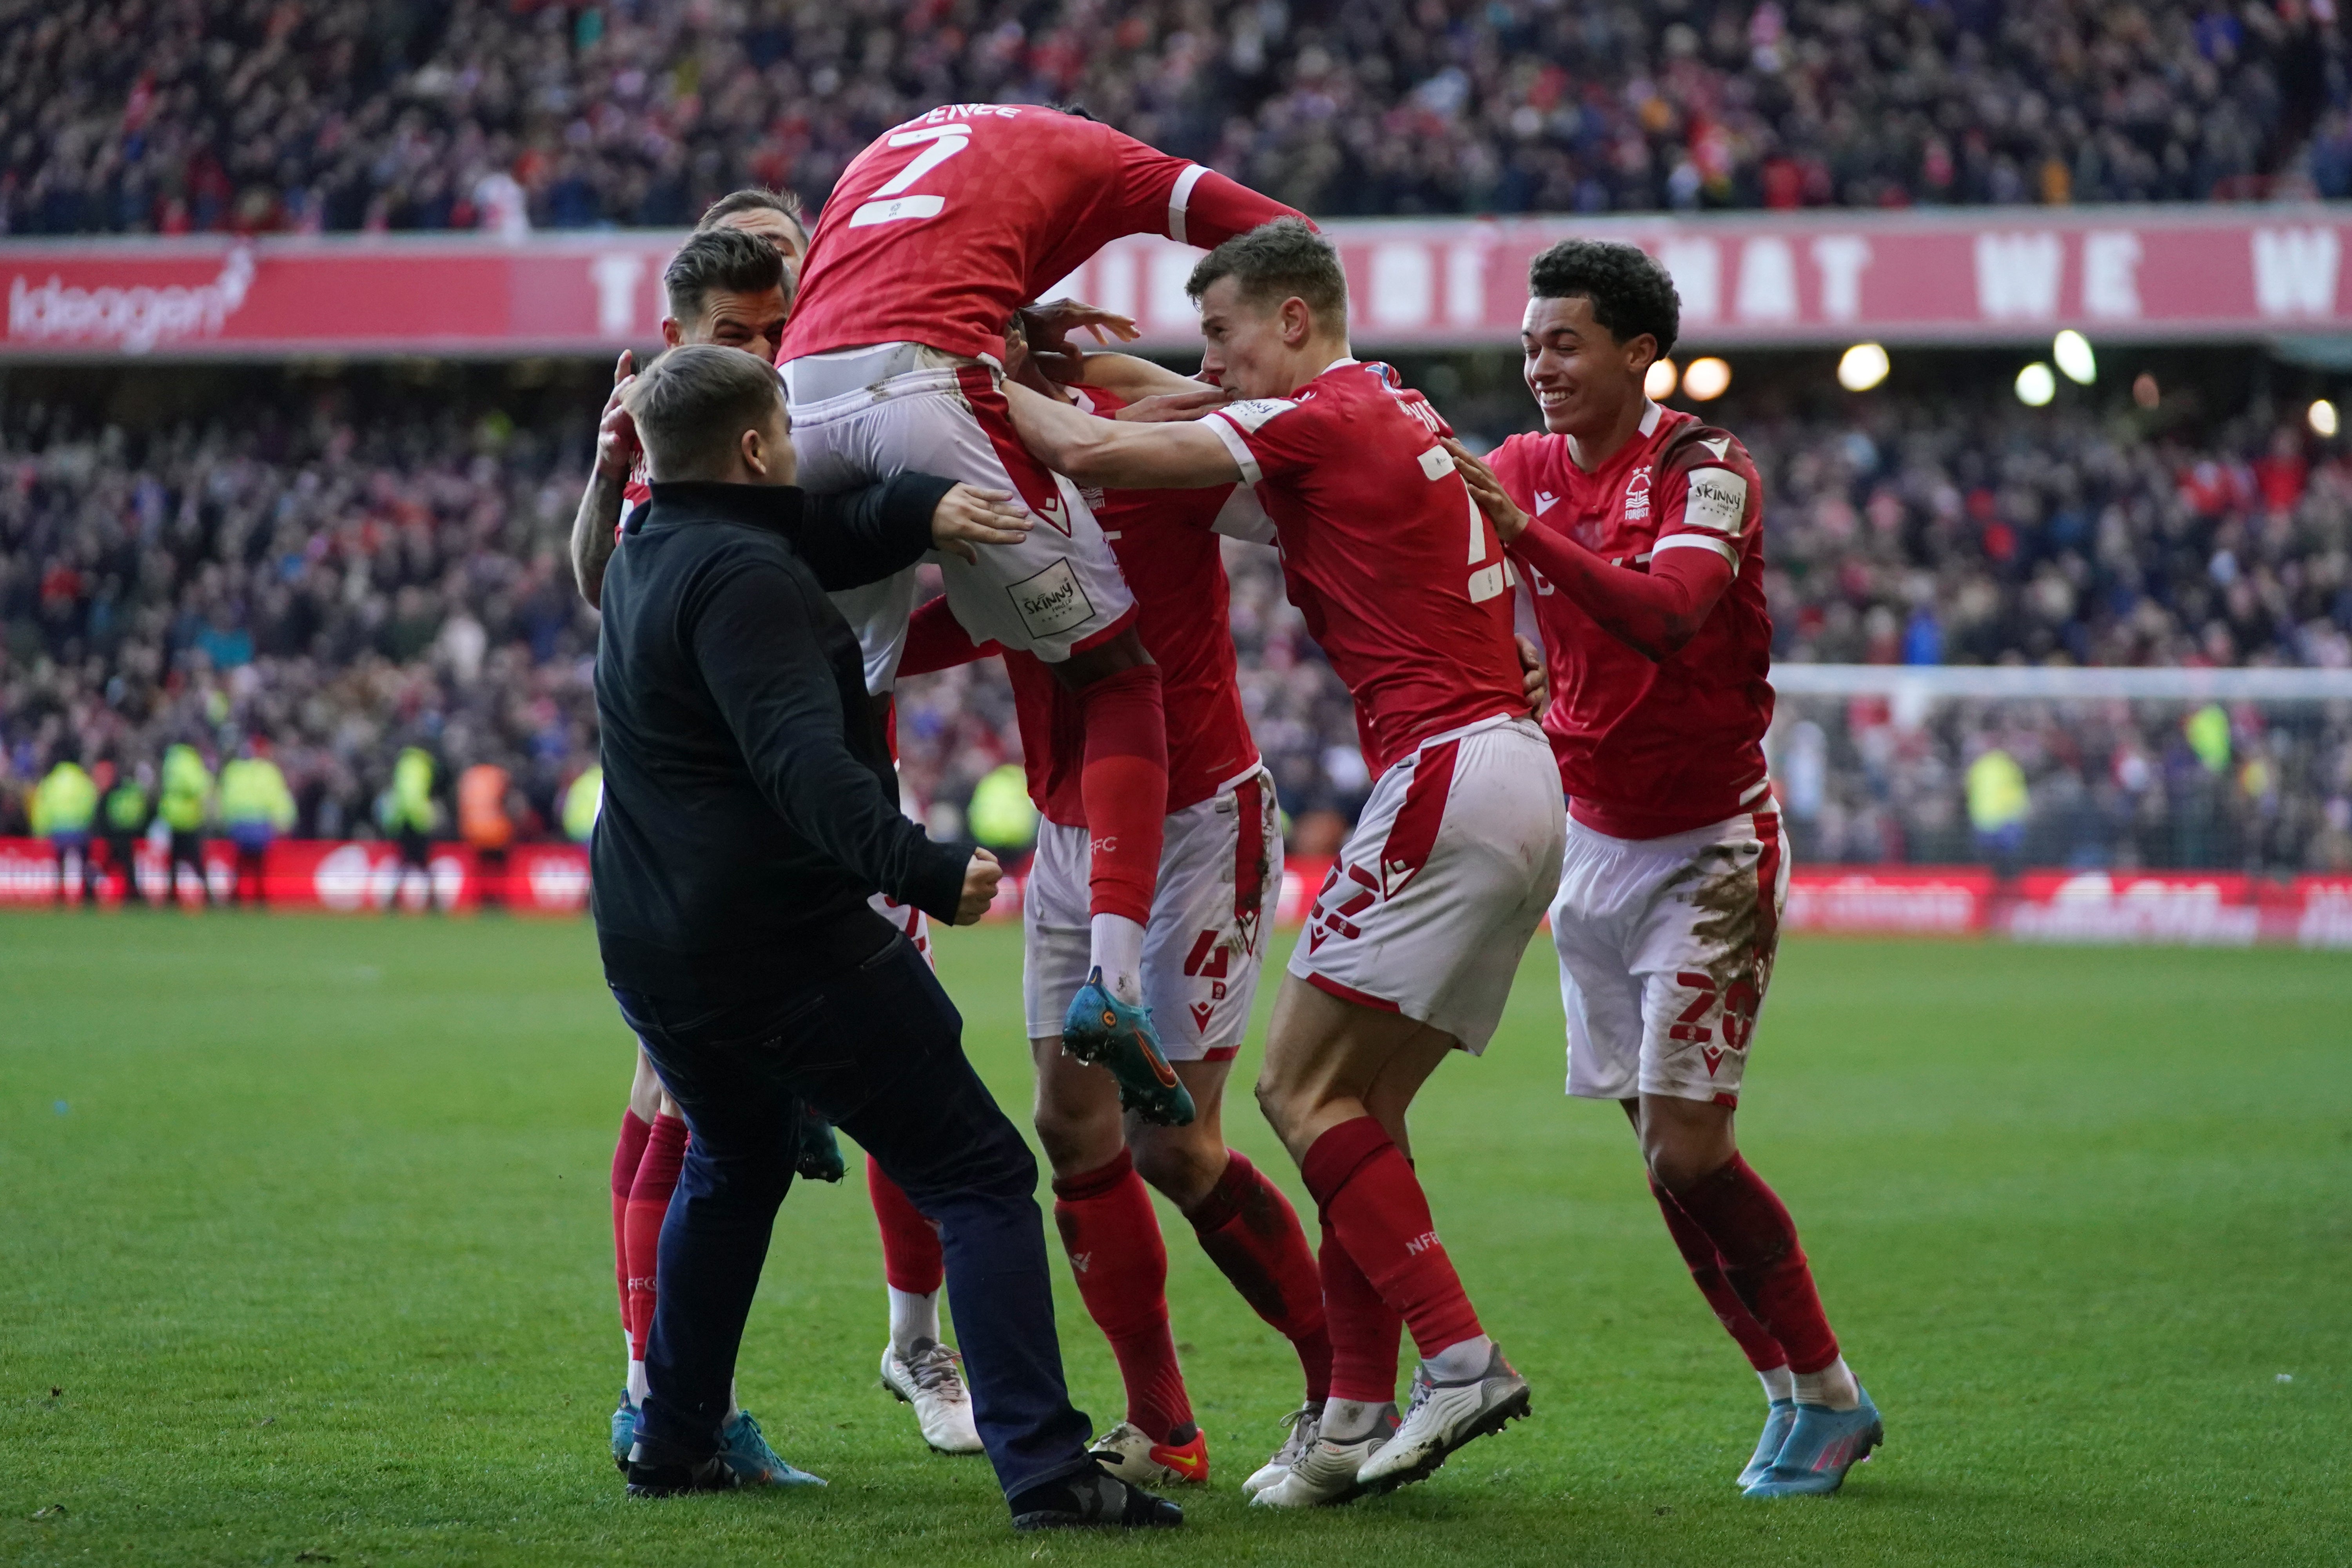 The Leicester fan appeared to attack Forest’s players as they celebrated